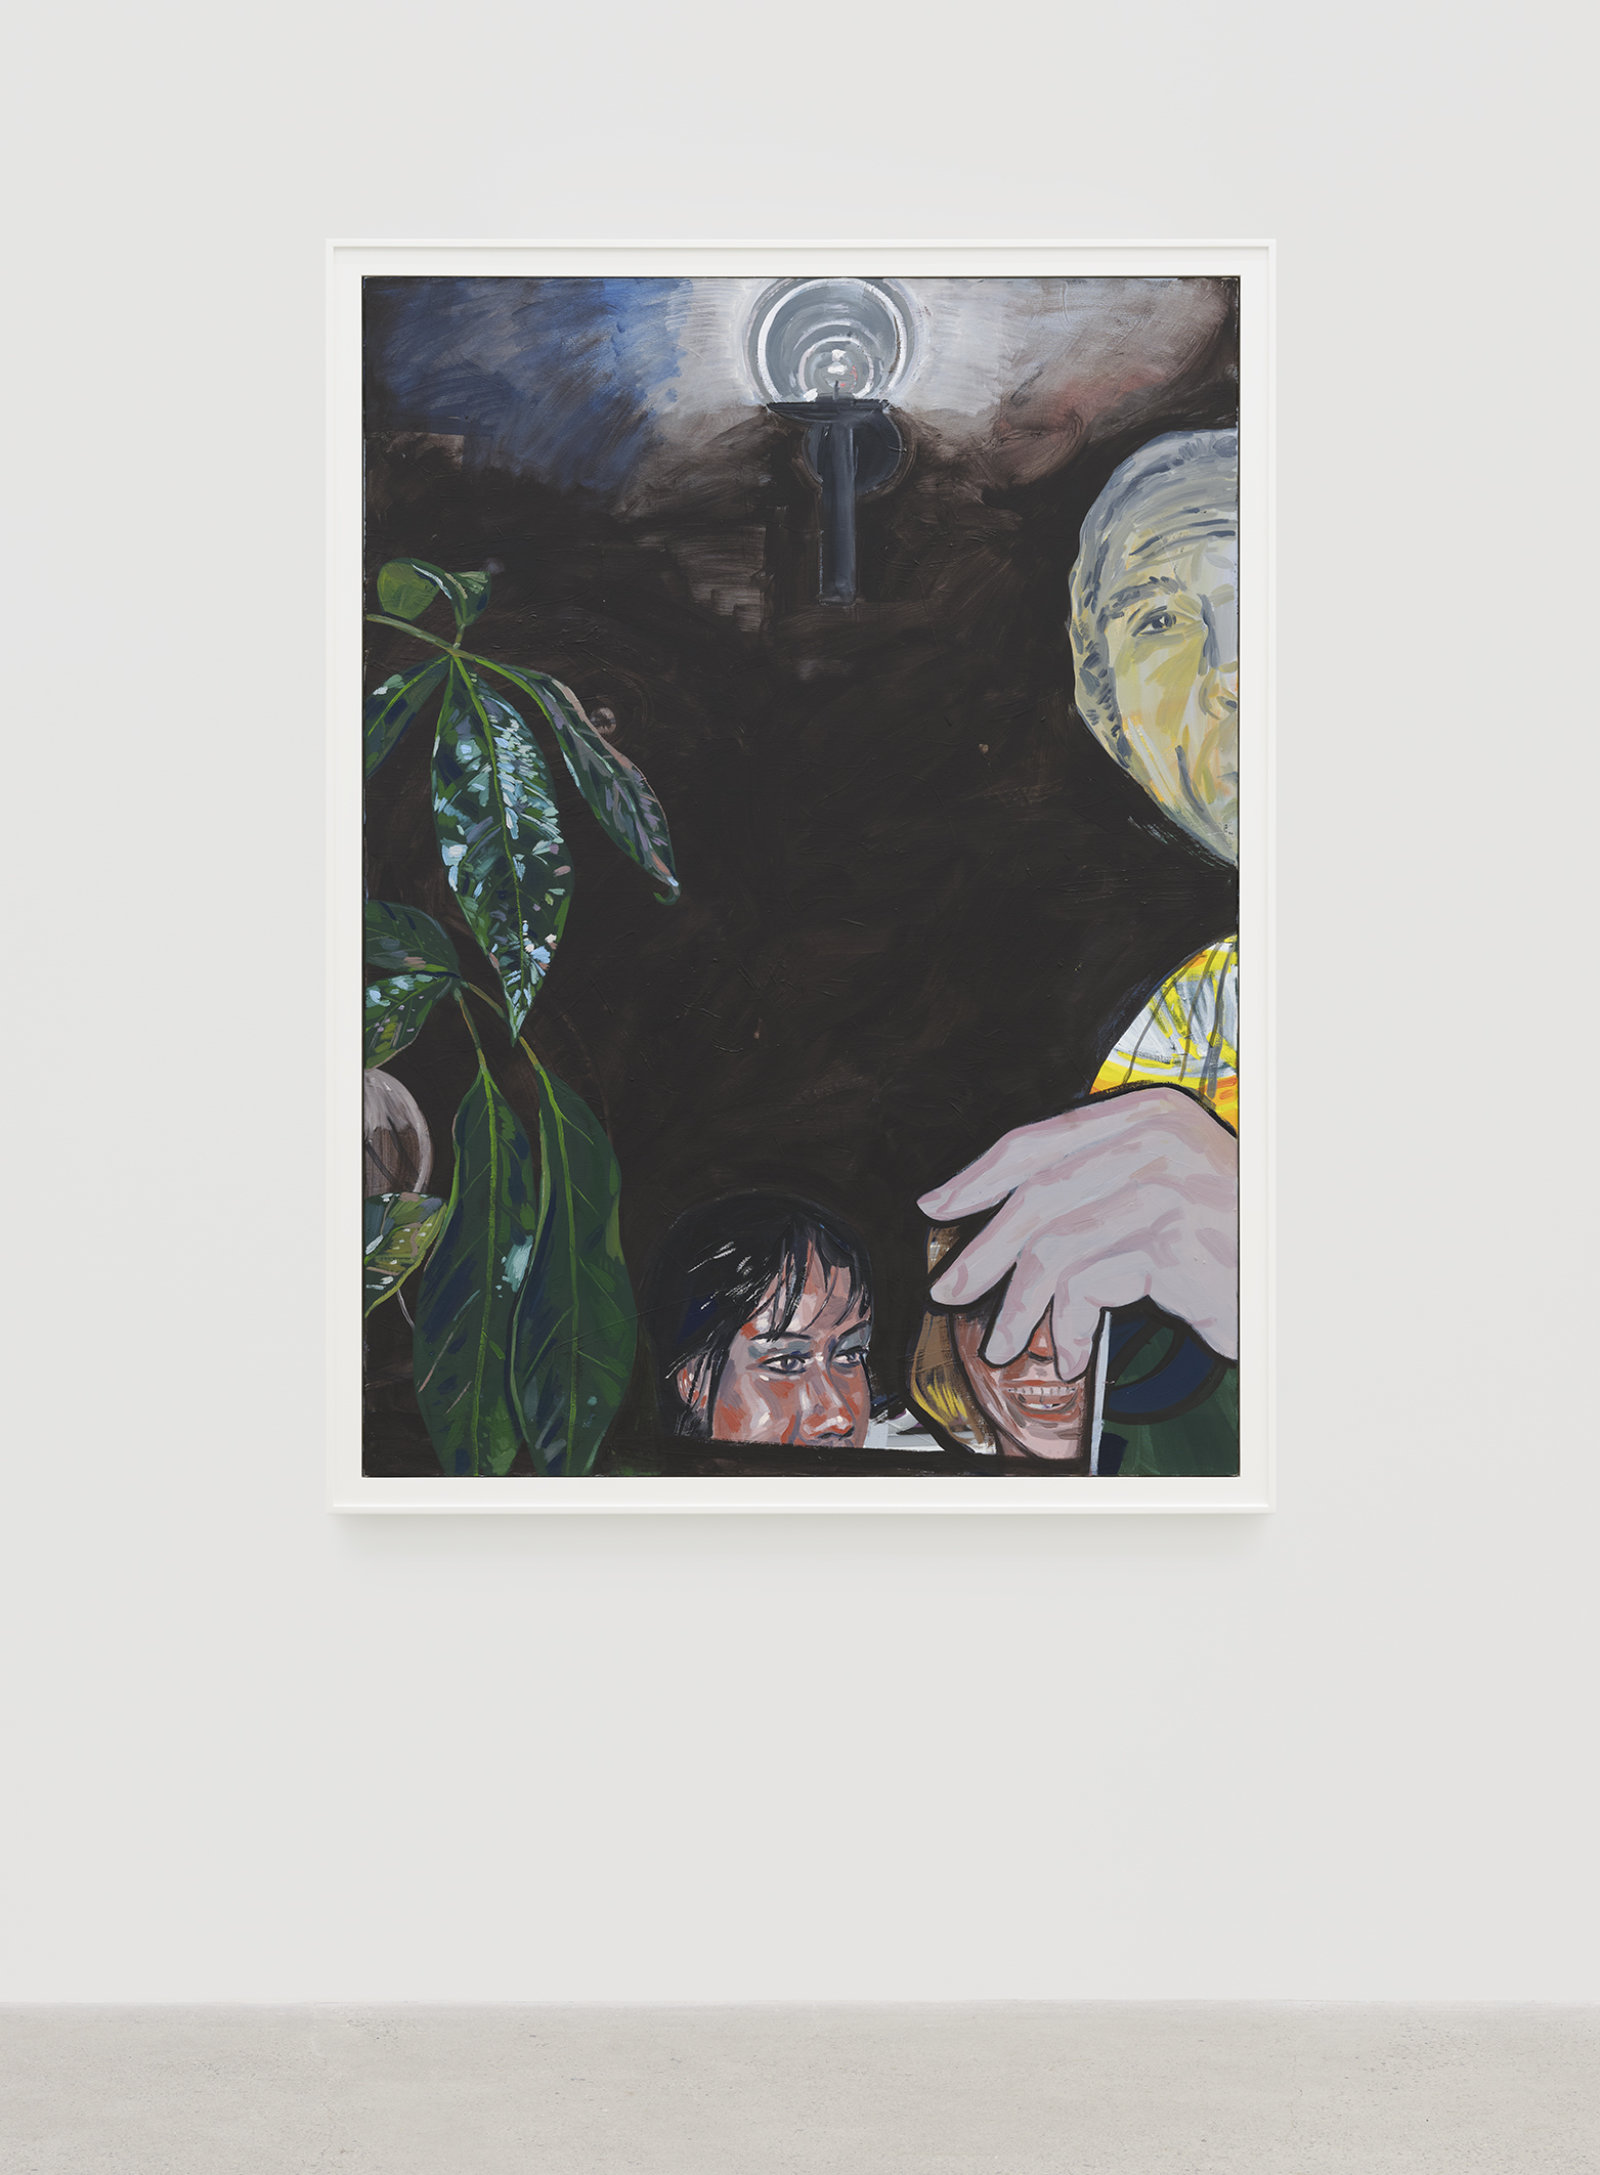 Damian Moppett, Untitled (Party with Plant), 2020, oil on canvas, 67 x 50 in. (170 x 127 cm)